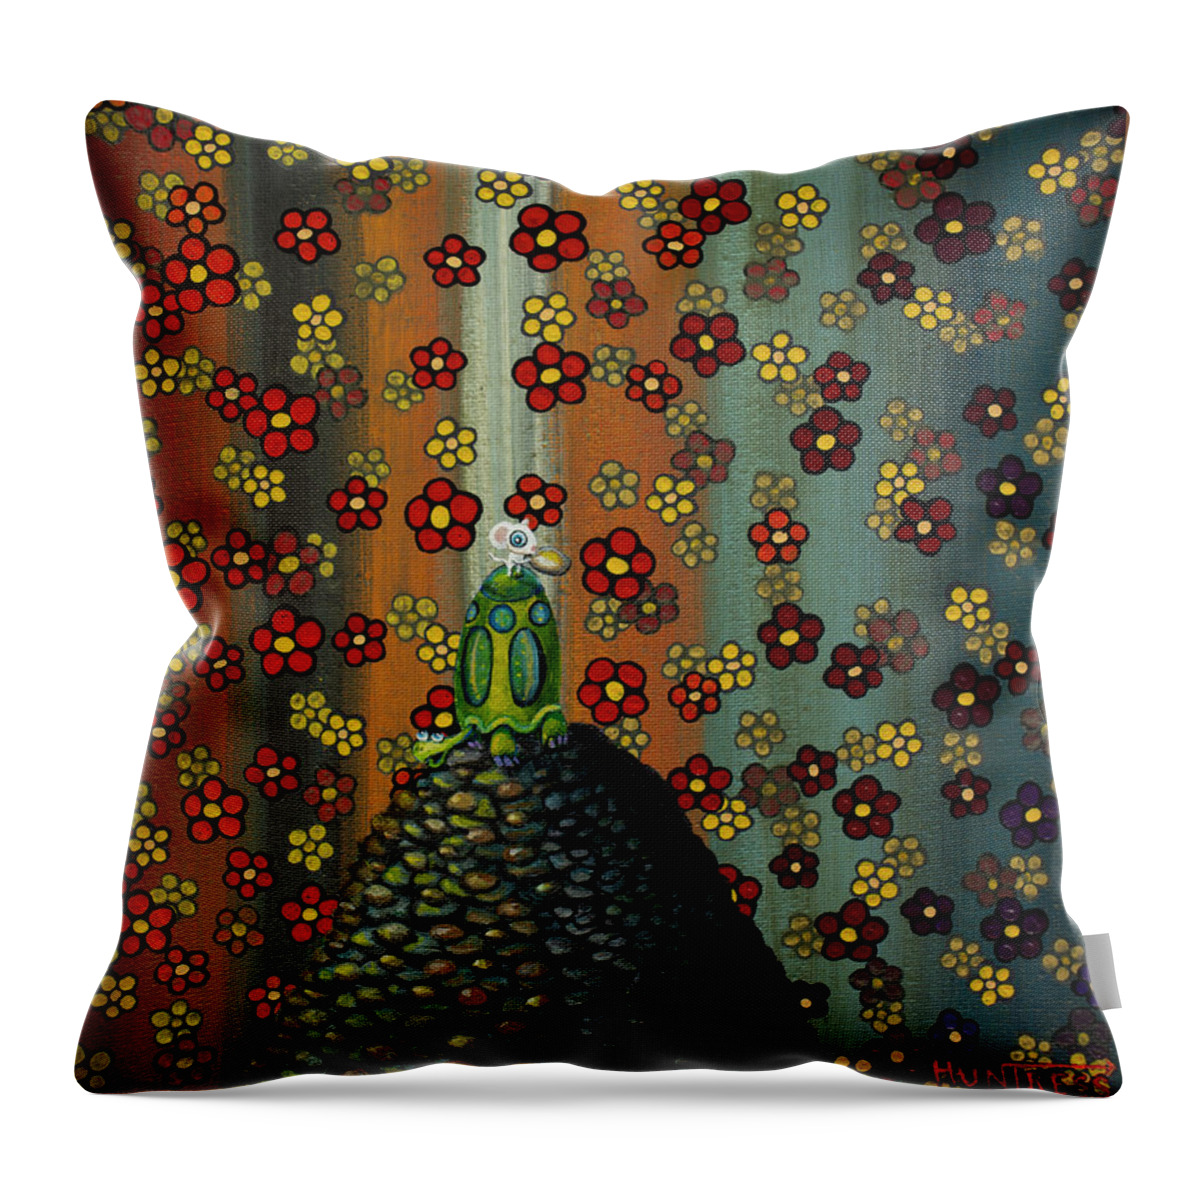 Optimism Throw Pillow featuring the painting Building Together by Mindy Huntress